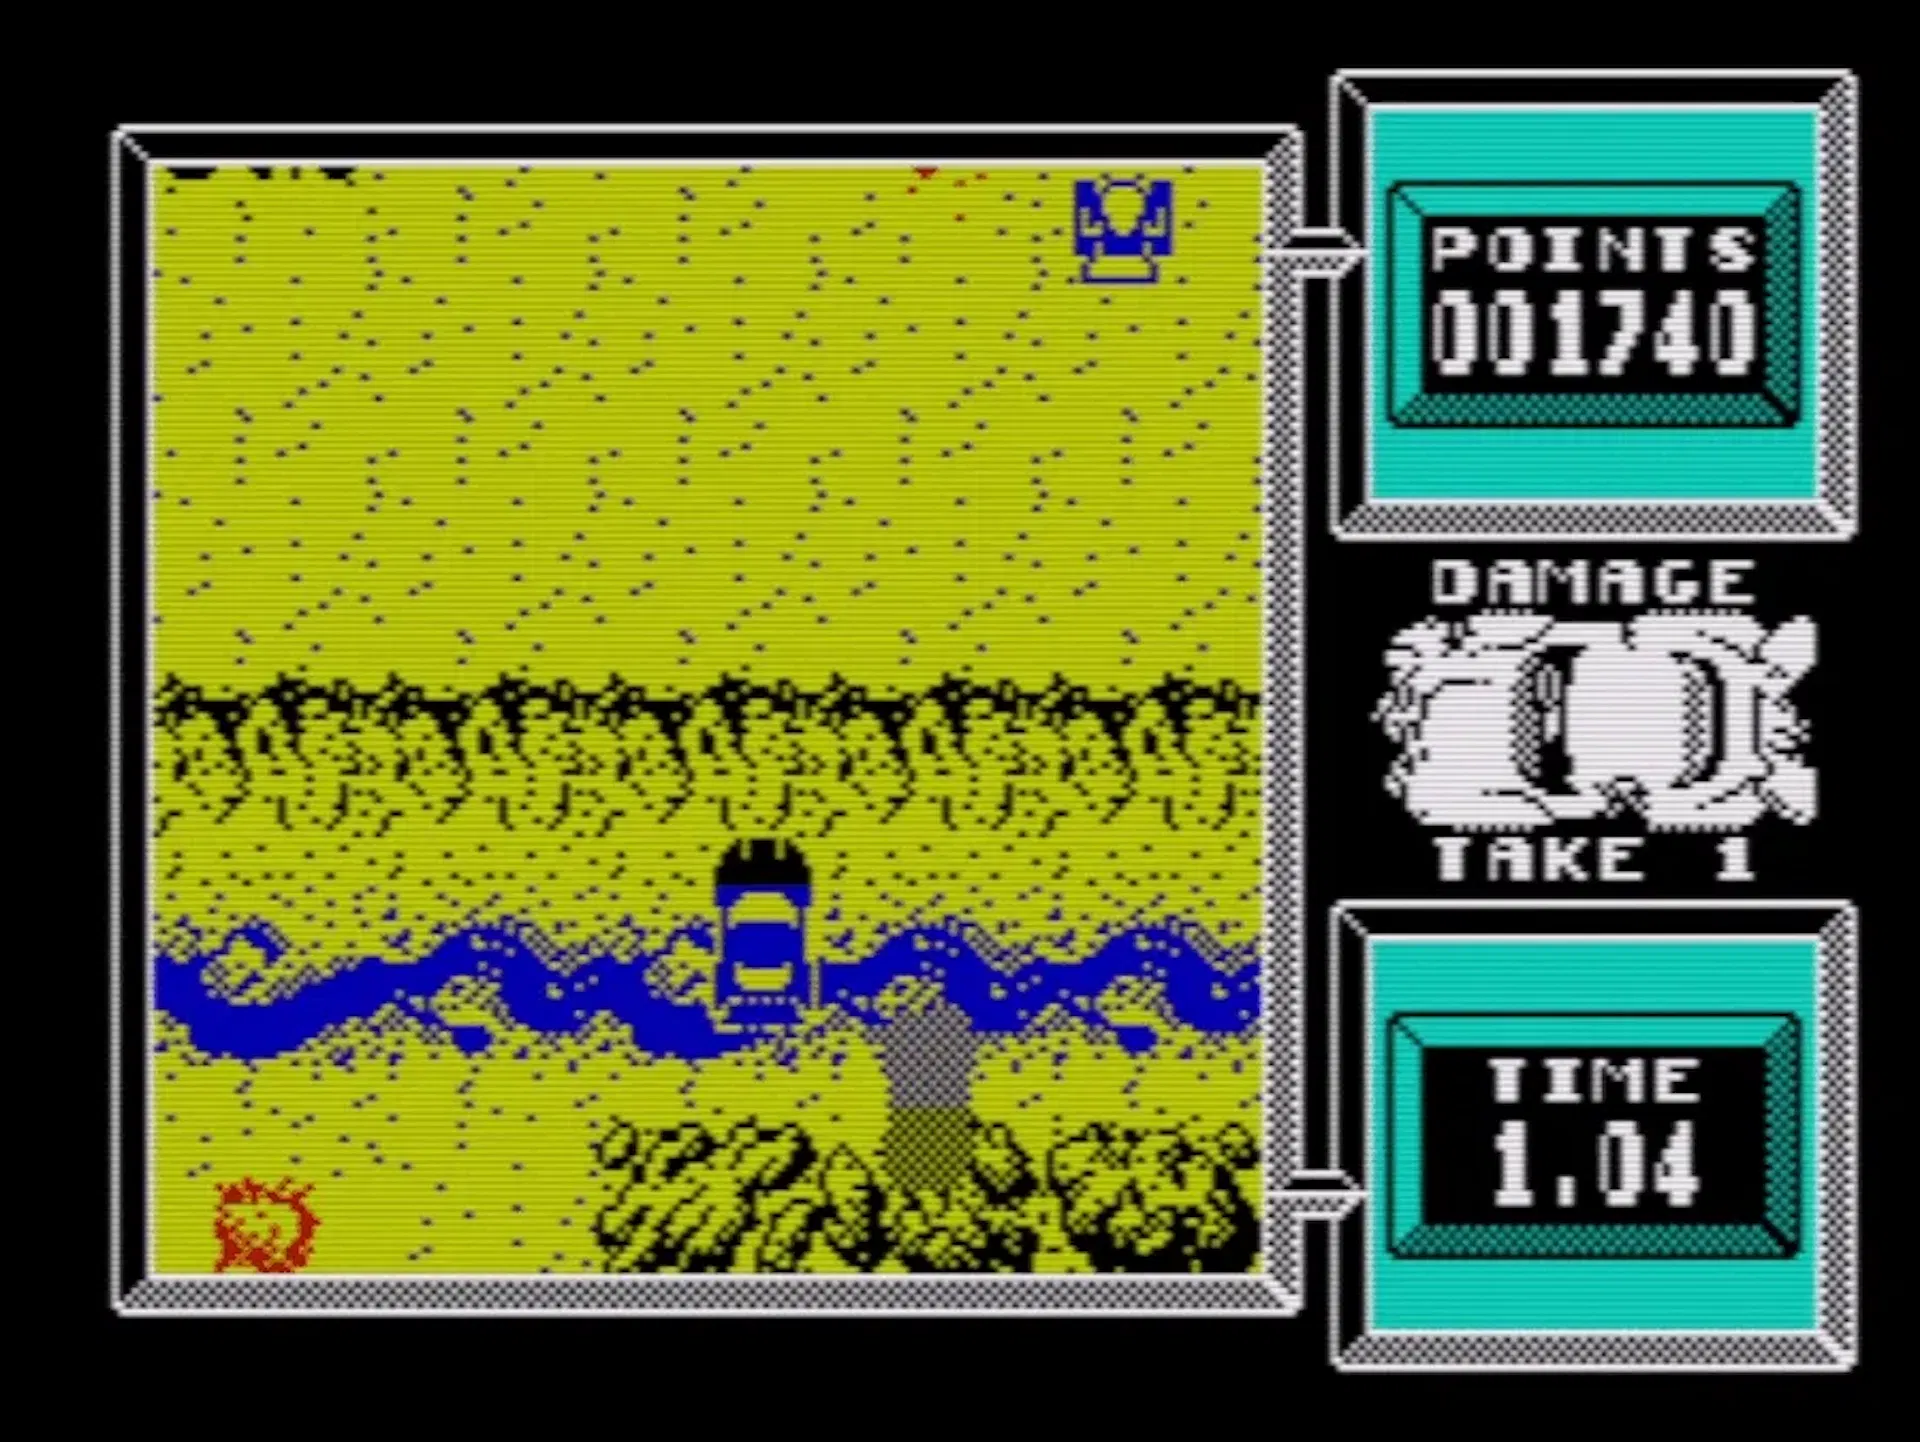 ZX Spectrum version showcasing all 7 scenes of this budget game.